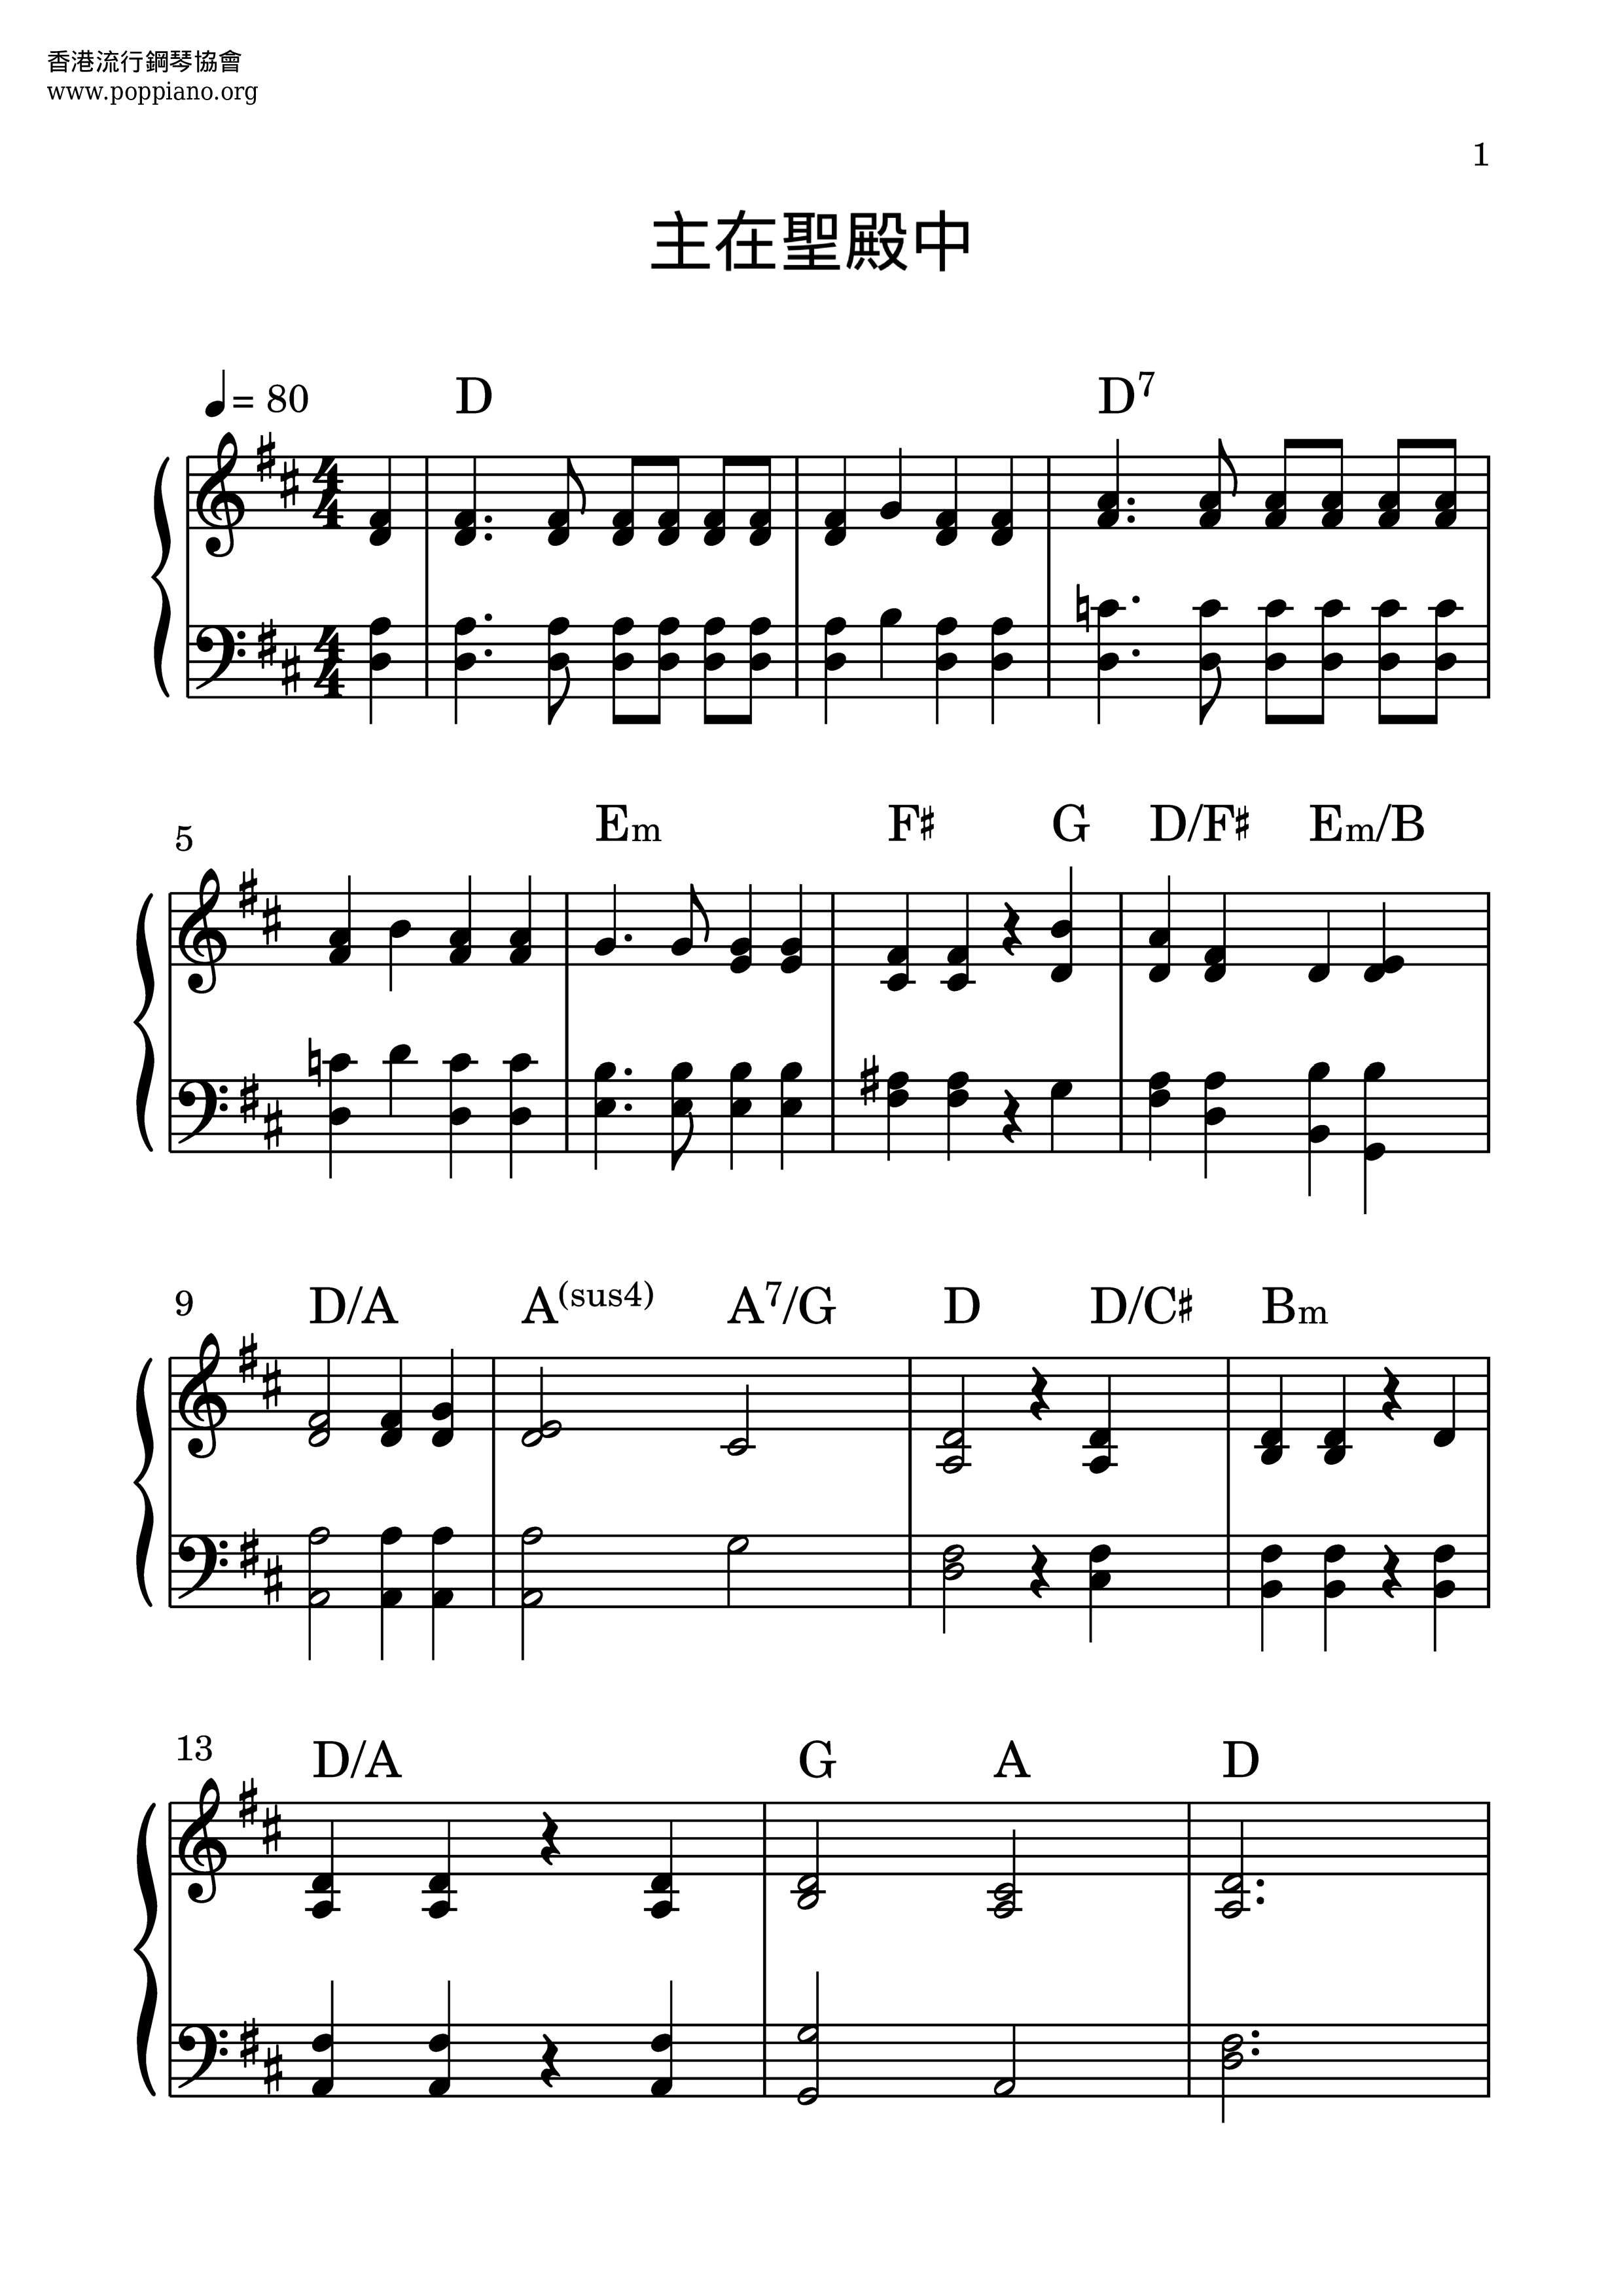 Lord In The Temple Score